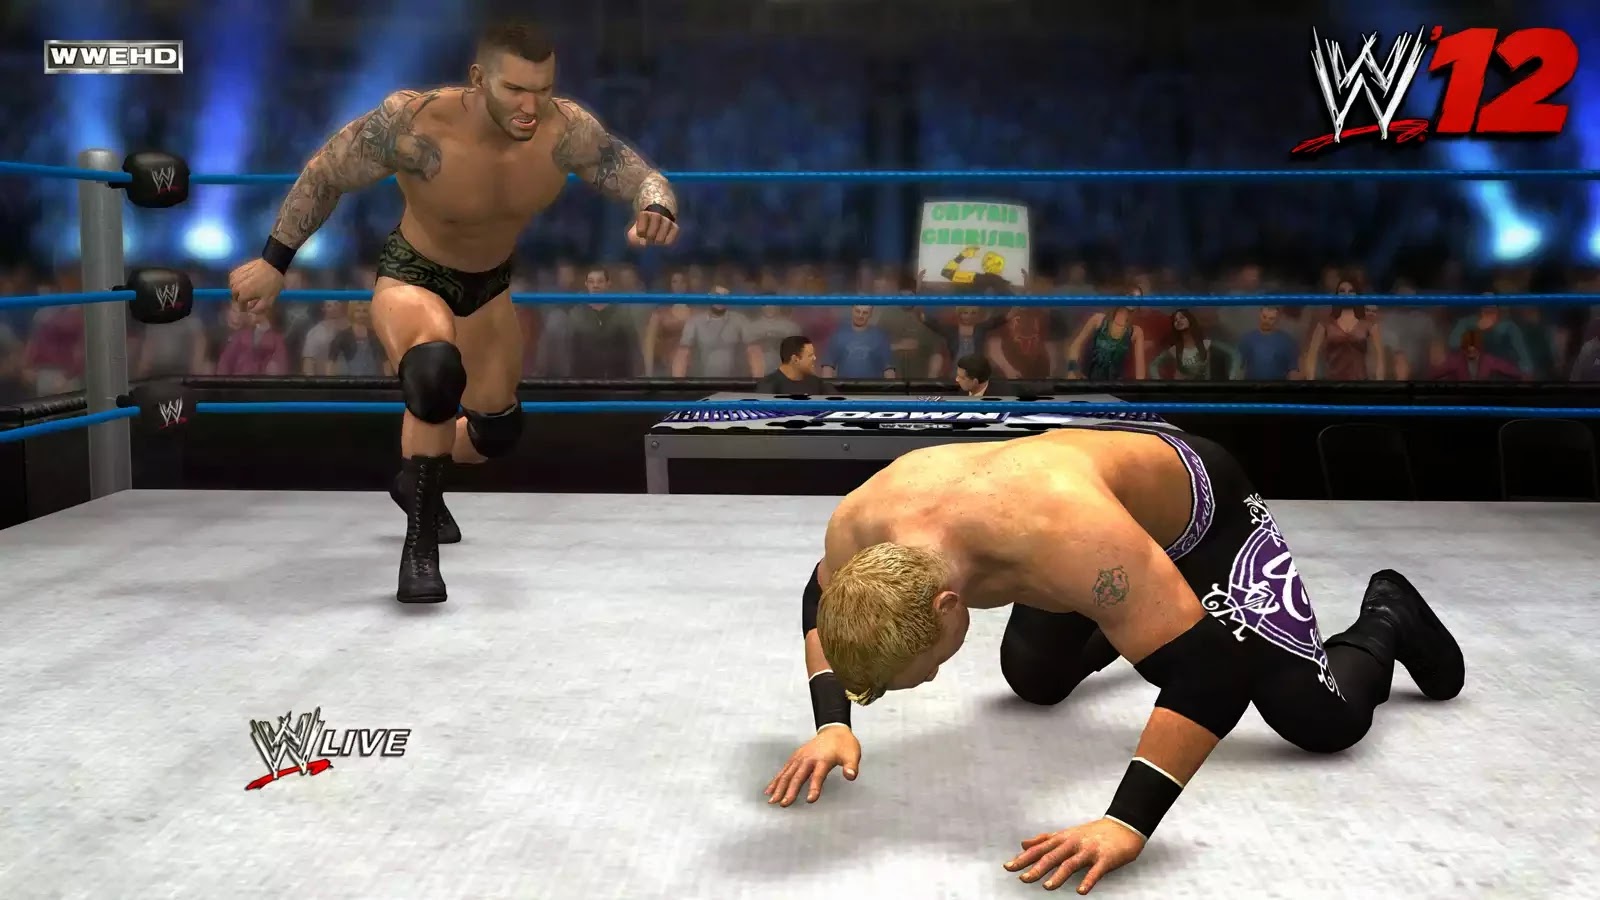 Wwe 13 Wii Iso Highly Compressed